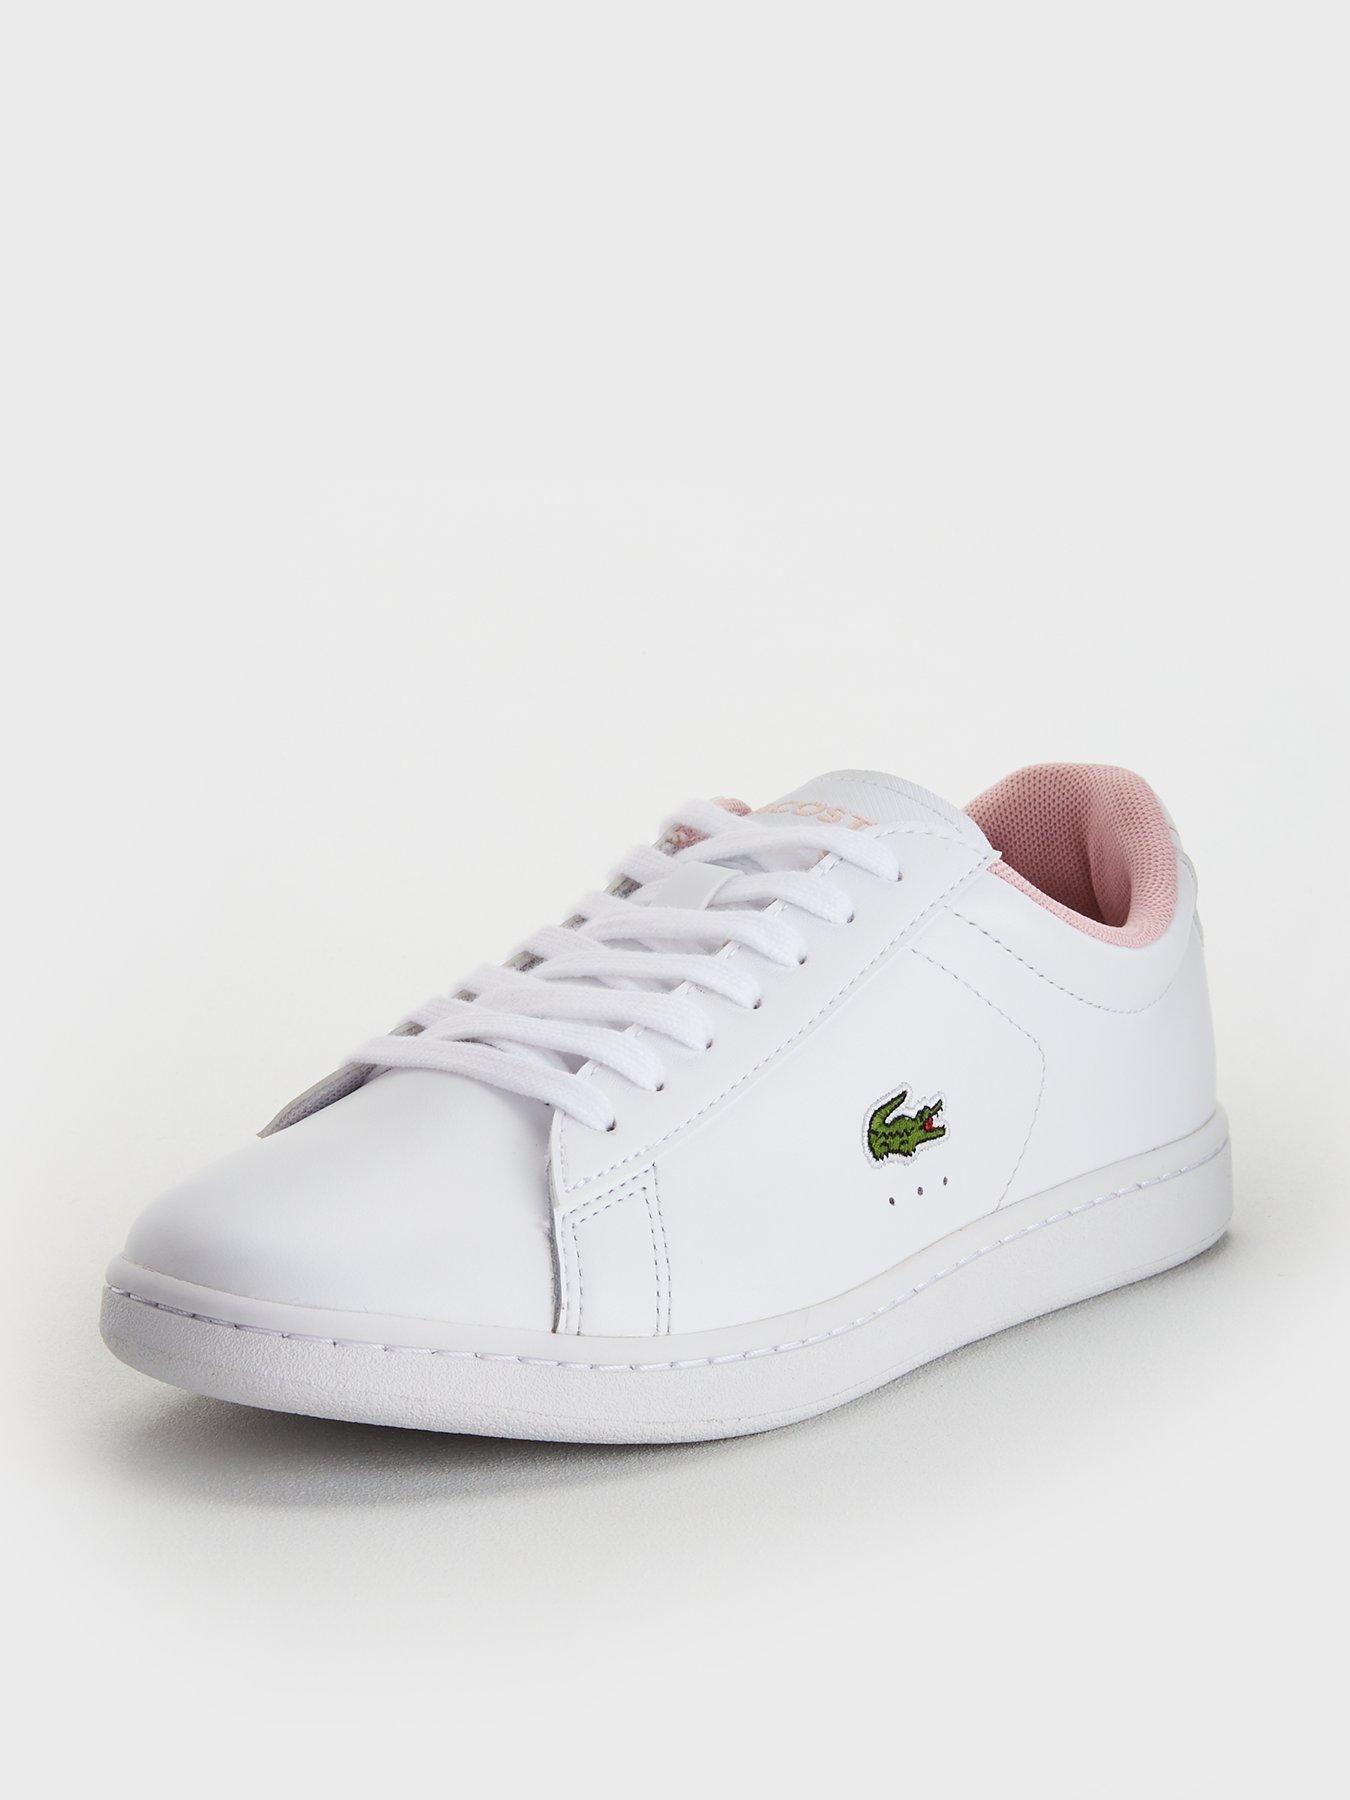 white womens lacoste trainers